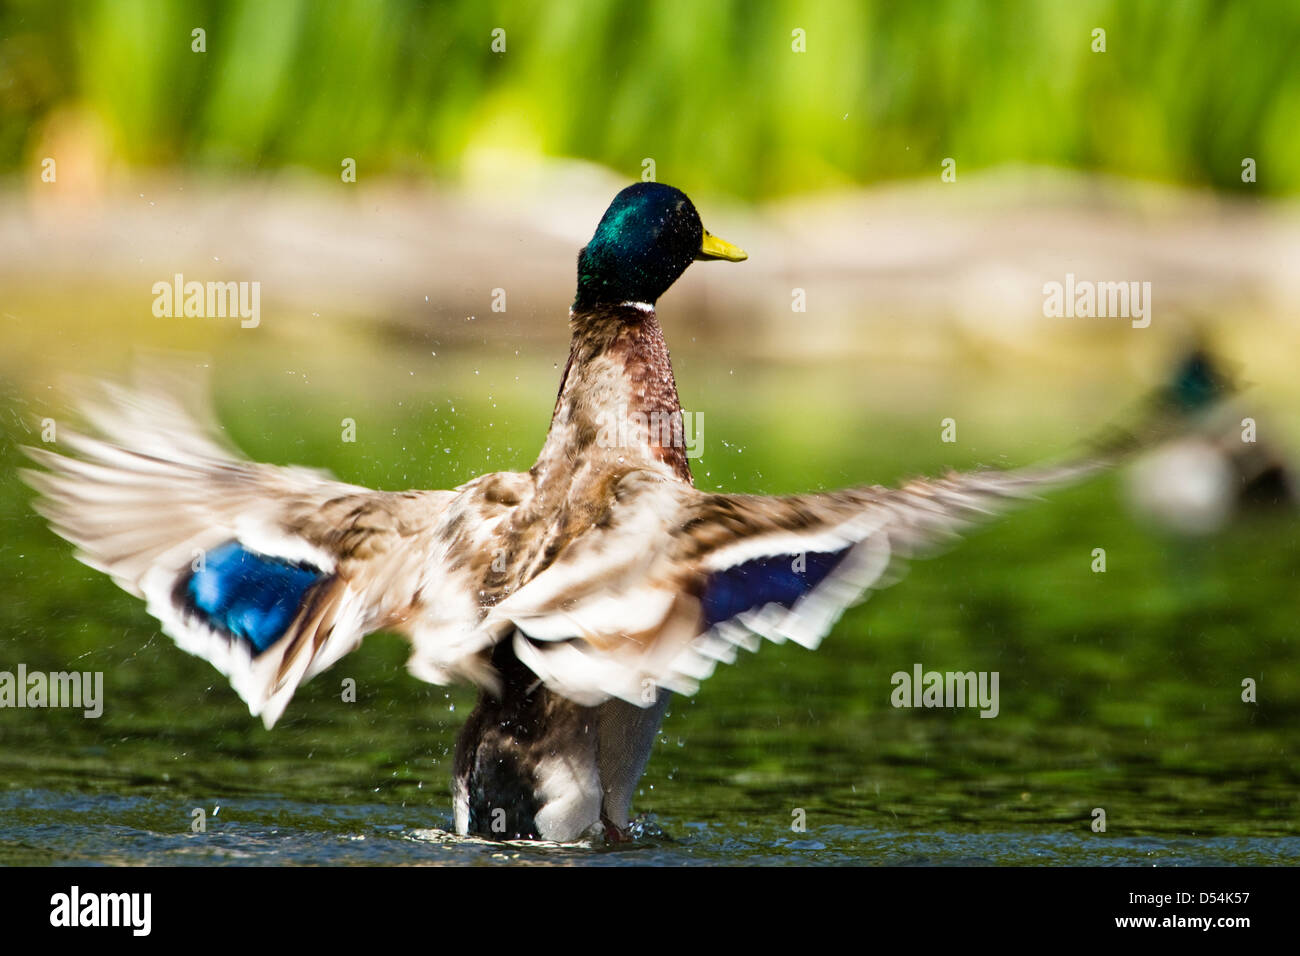 Anas platyrhynchos,Drake Mallard flipping his wings over the surface of water in slowmotion, back view Stock Photo